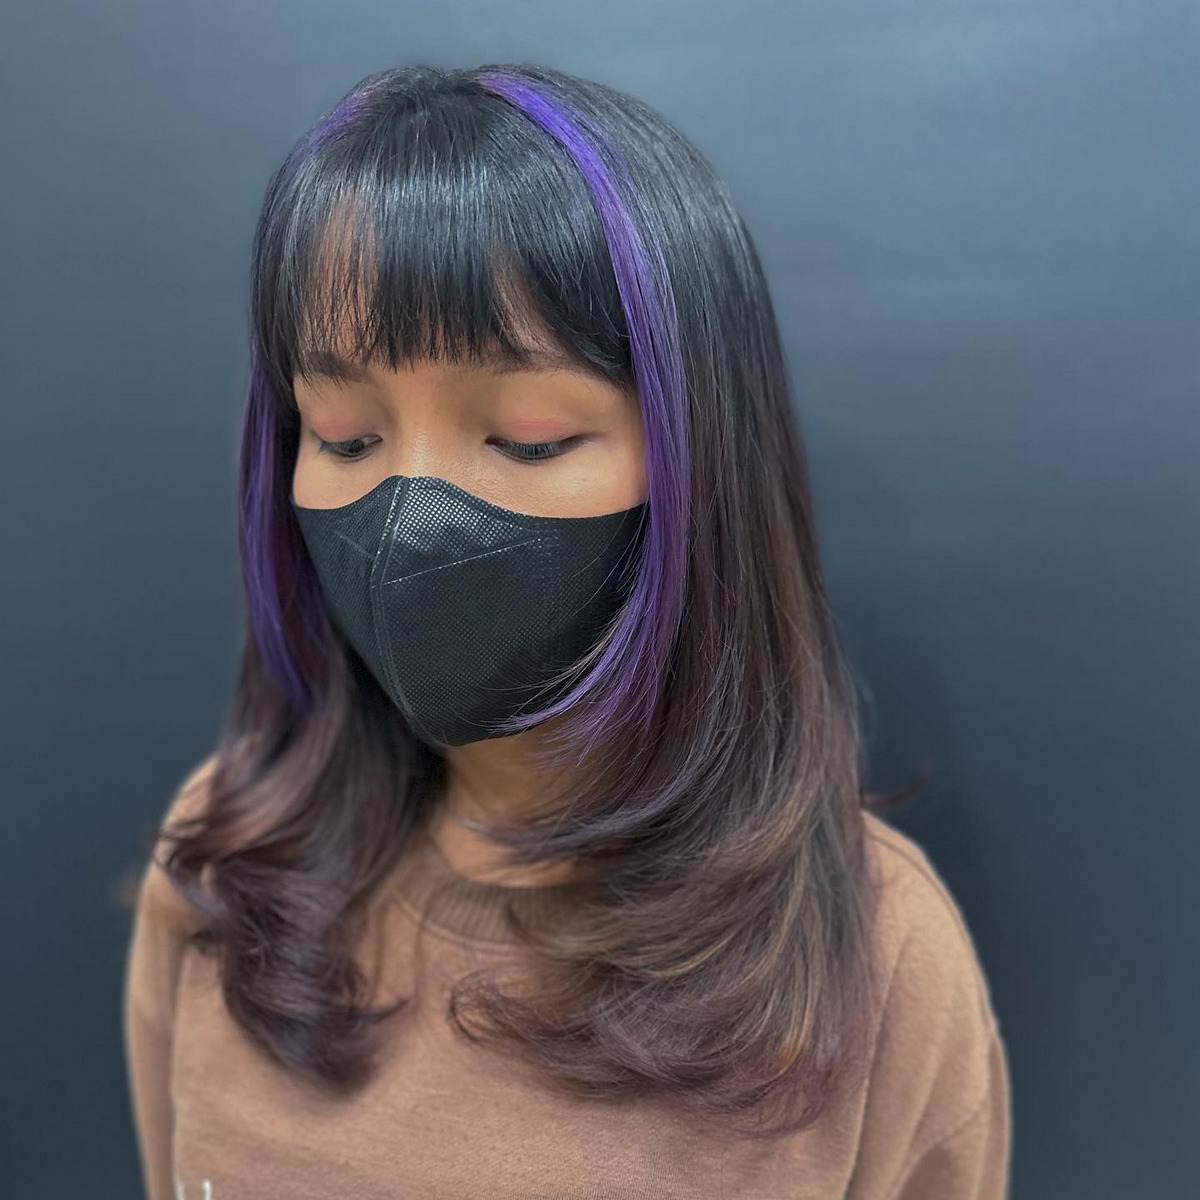 Highlight The Long Purple Bob With Silly Bangs